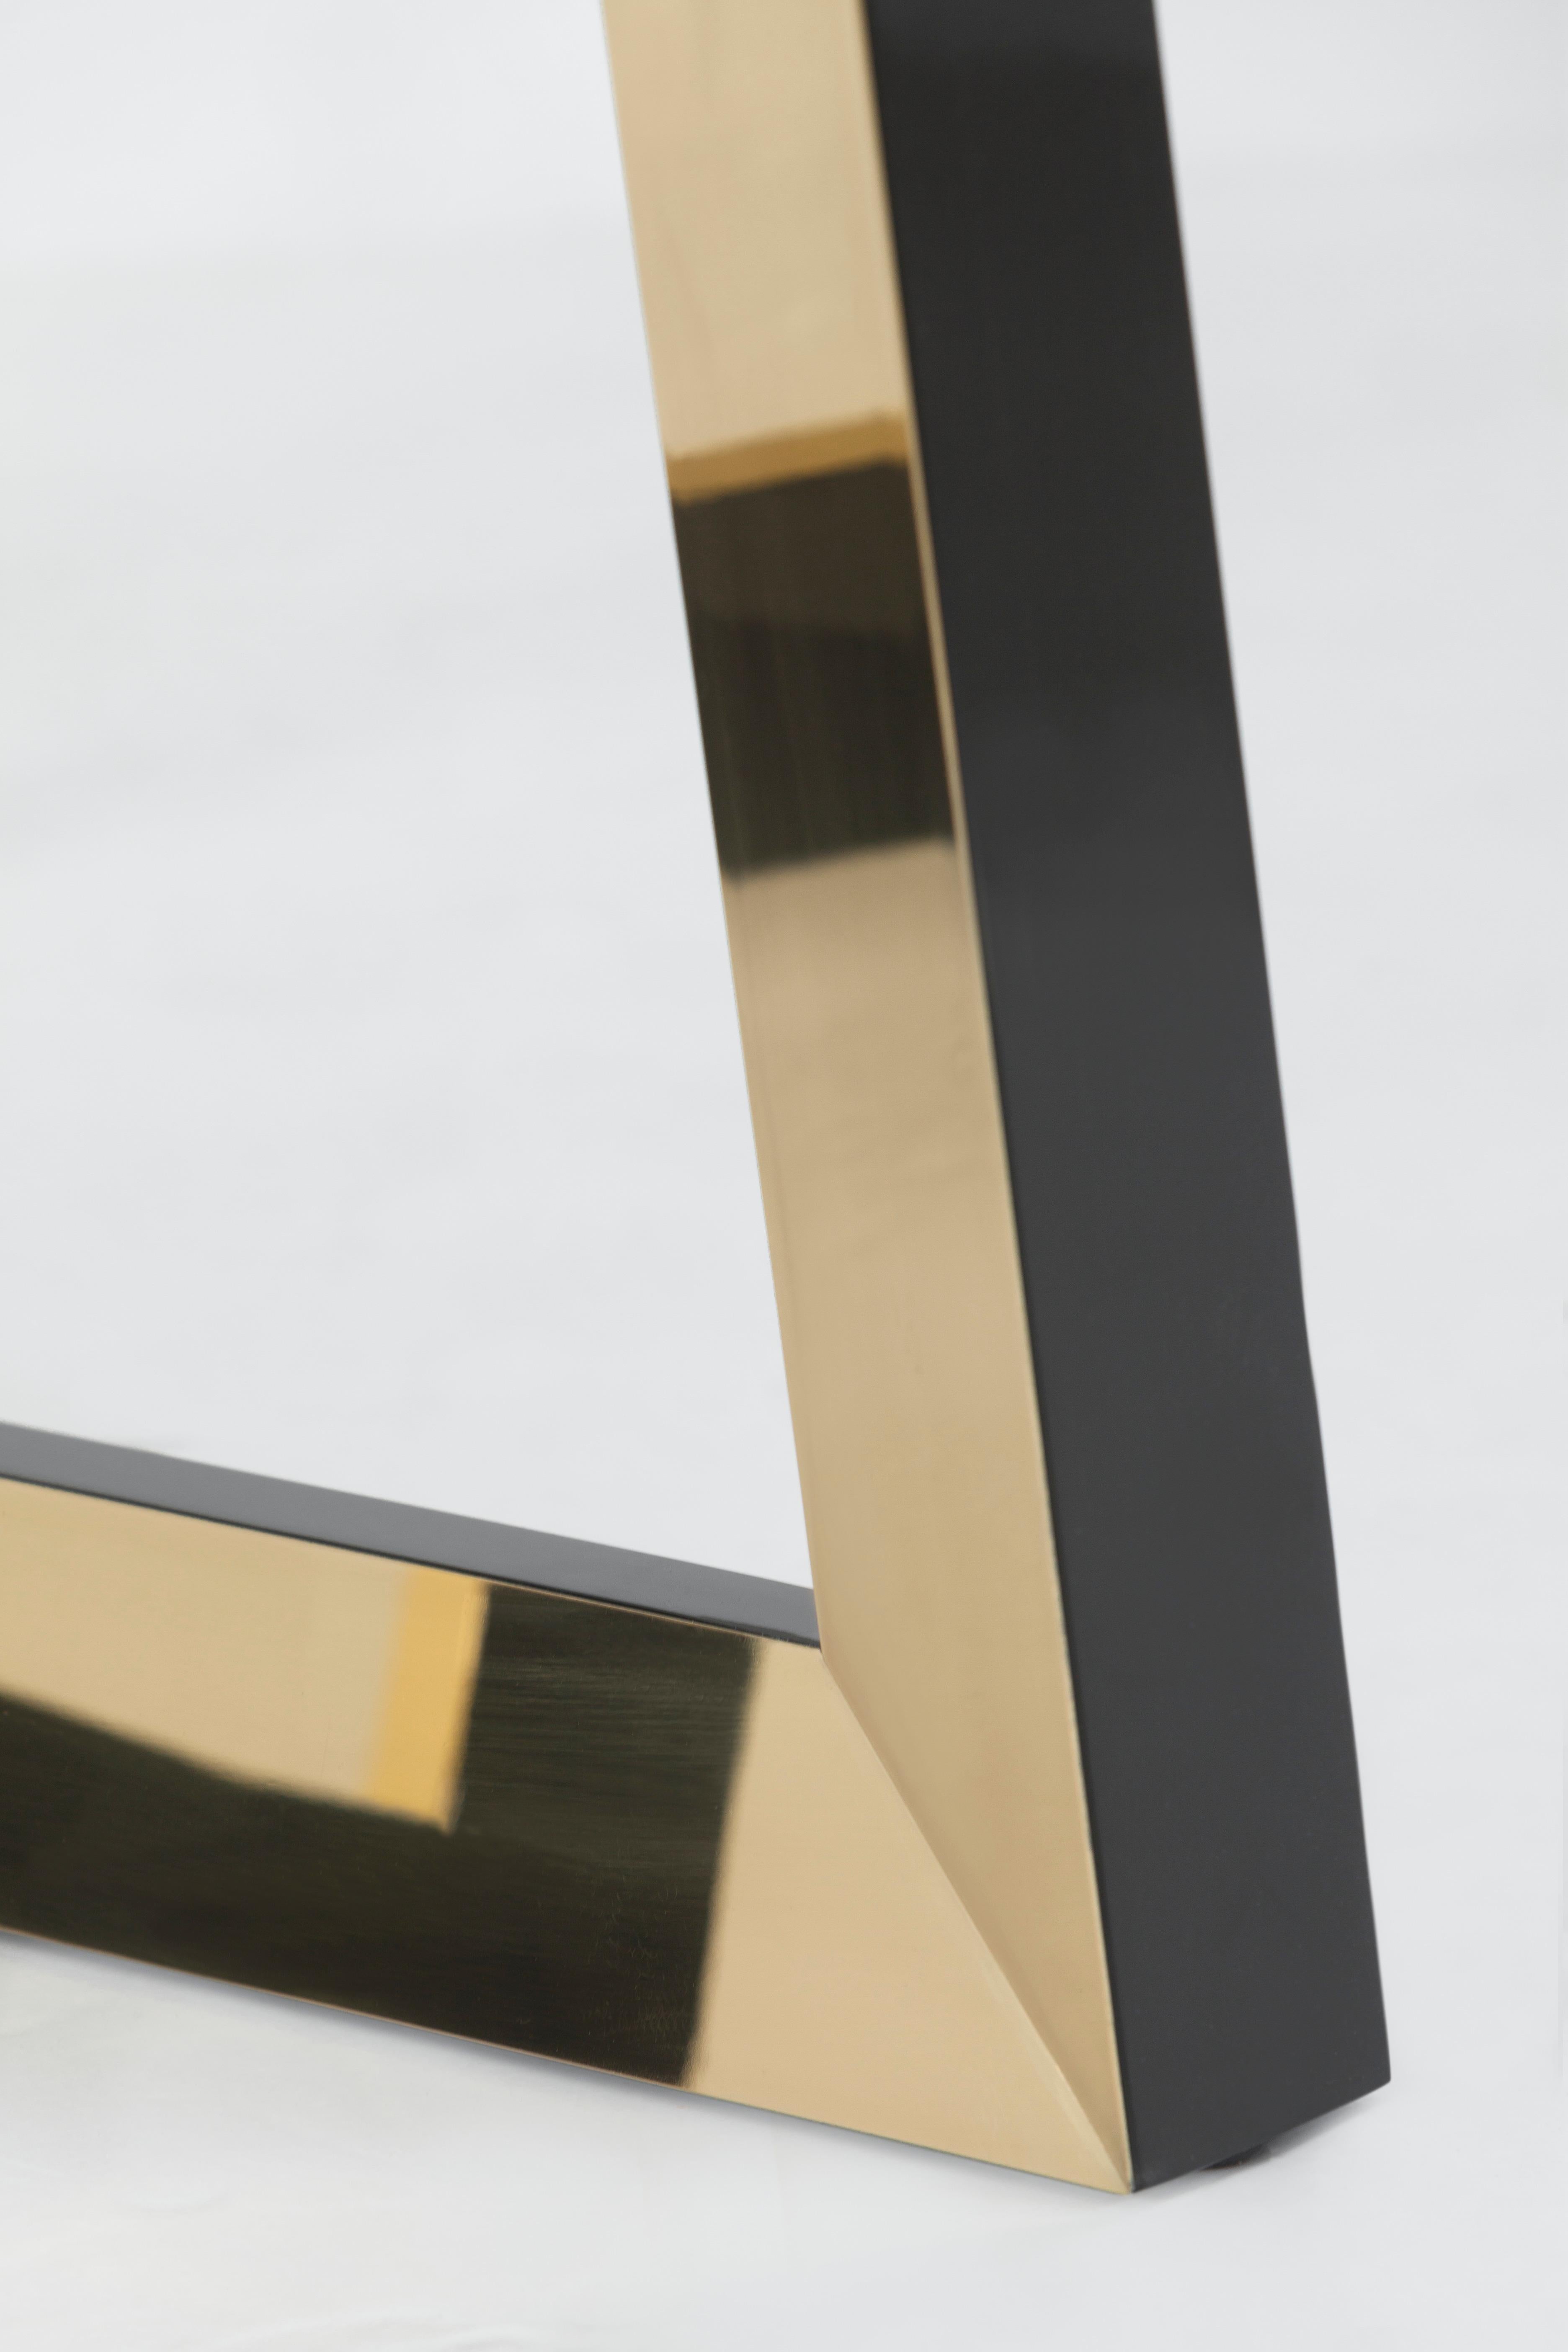 Hand-Crafted Modern Olisippo Console Table, Brass Glass, Handmade in Portugal by Greenapple For Sale